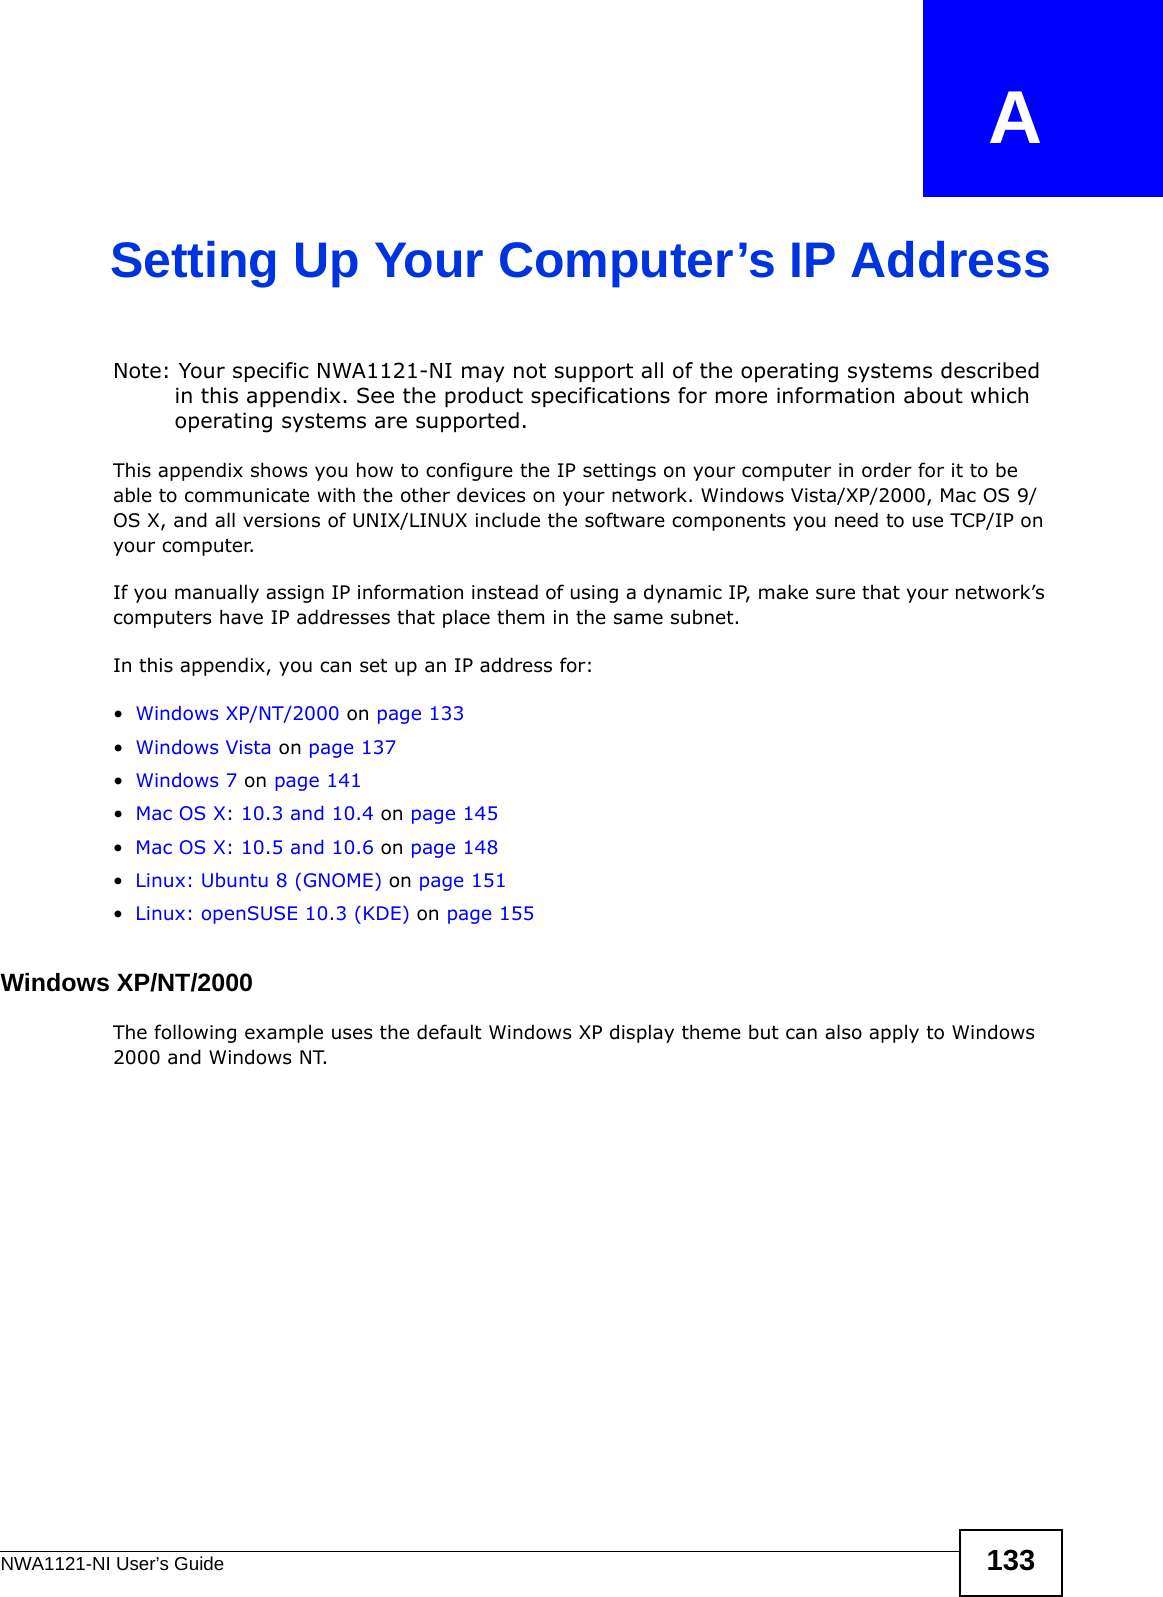 NWA1121-NI User’s Guide 133APPENDIX   ASetting Up Your Computer’s IP AddressNote: Your specific NWA1121-NI may not support all of the operating systems described in this appendix. See the product specifications for more information about which operating systems are supported.This appendix shows you how to configure the IP settings on your computer in order for it to be able to communicate with the other devices on your network. Windows Vista/XP/2000, Mac OS 9/OS X, and all versions of UNIX/LINUX include the software components you need to use TCP/IP on your computer. If you manually assign IP information instead of using a dynamic IP, make sure that your network’s computers have IP addresses that place them in the same subnet.In this appendix, you can set up an IP address for:•Windows XP/NT/2000 on page 133•Windows Vista on page 137•Windows 7 on page 141•Mac OS X: 10.3 and 10.4 on page 145•Mac OS X: 10.5 and 10.6 on page 148•Linux: Ubuntu 8 (GNOME) on page 151•Linux: openSUSE 10.3 (KDE) on page 155Windows XP/NT/2000The following example uses the default Windows XP display theme but can also apply to Windows 2000 and Windows NT.